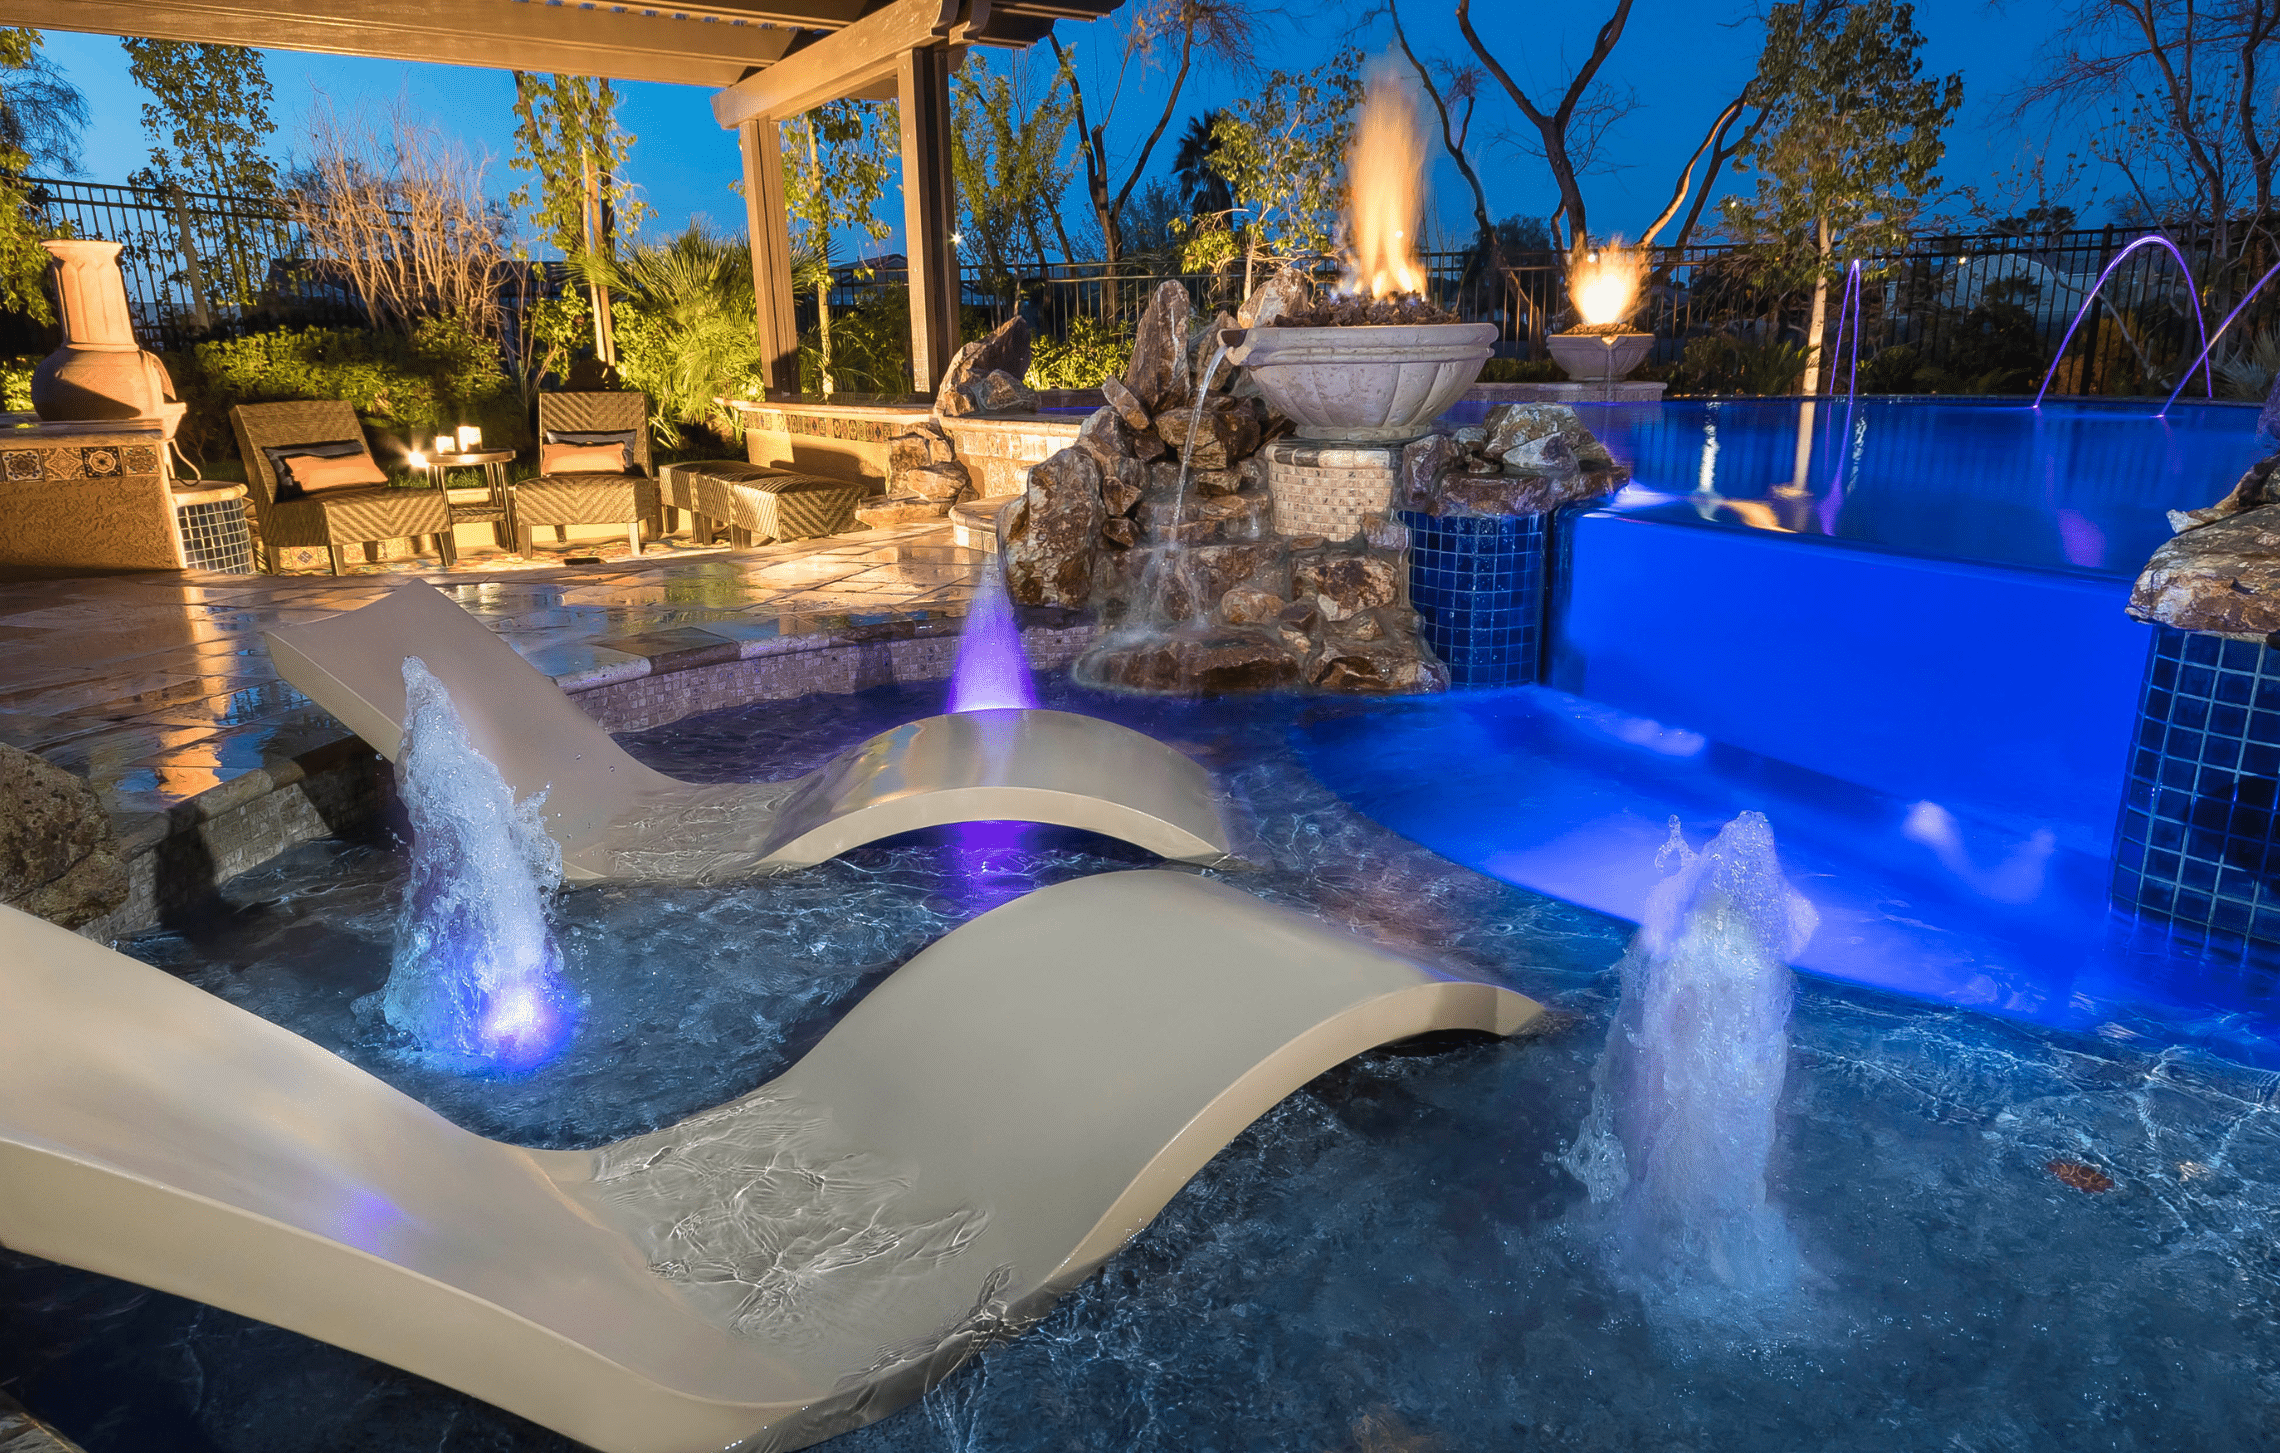 Spa Lights - Pool Lighting Features